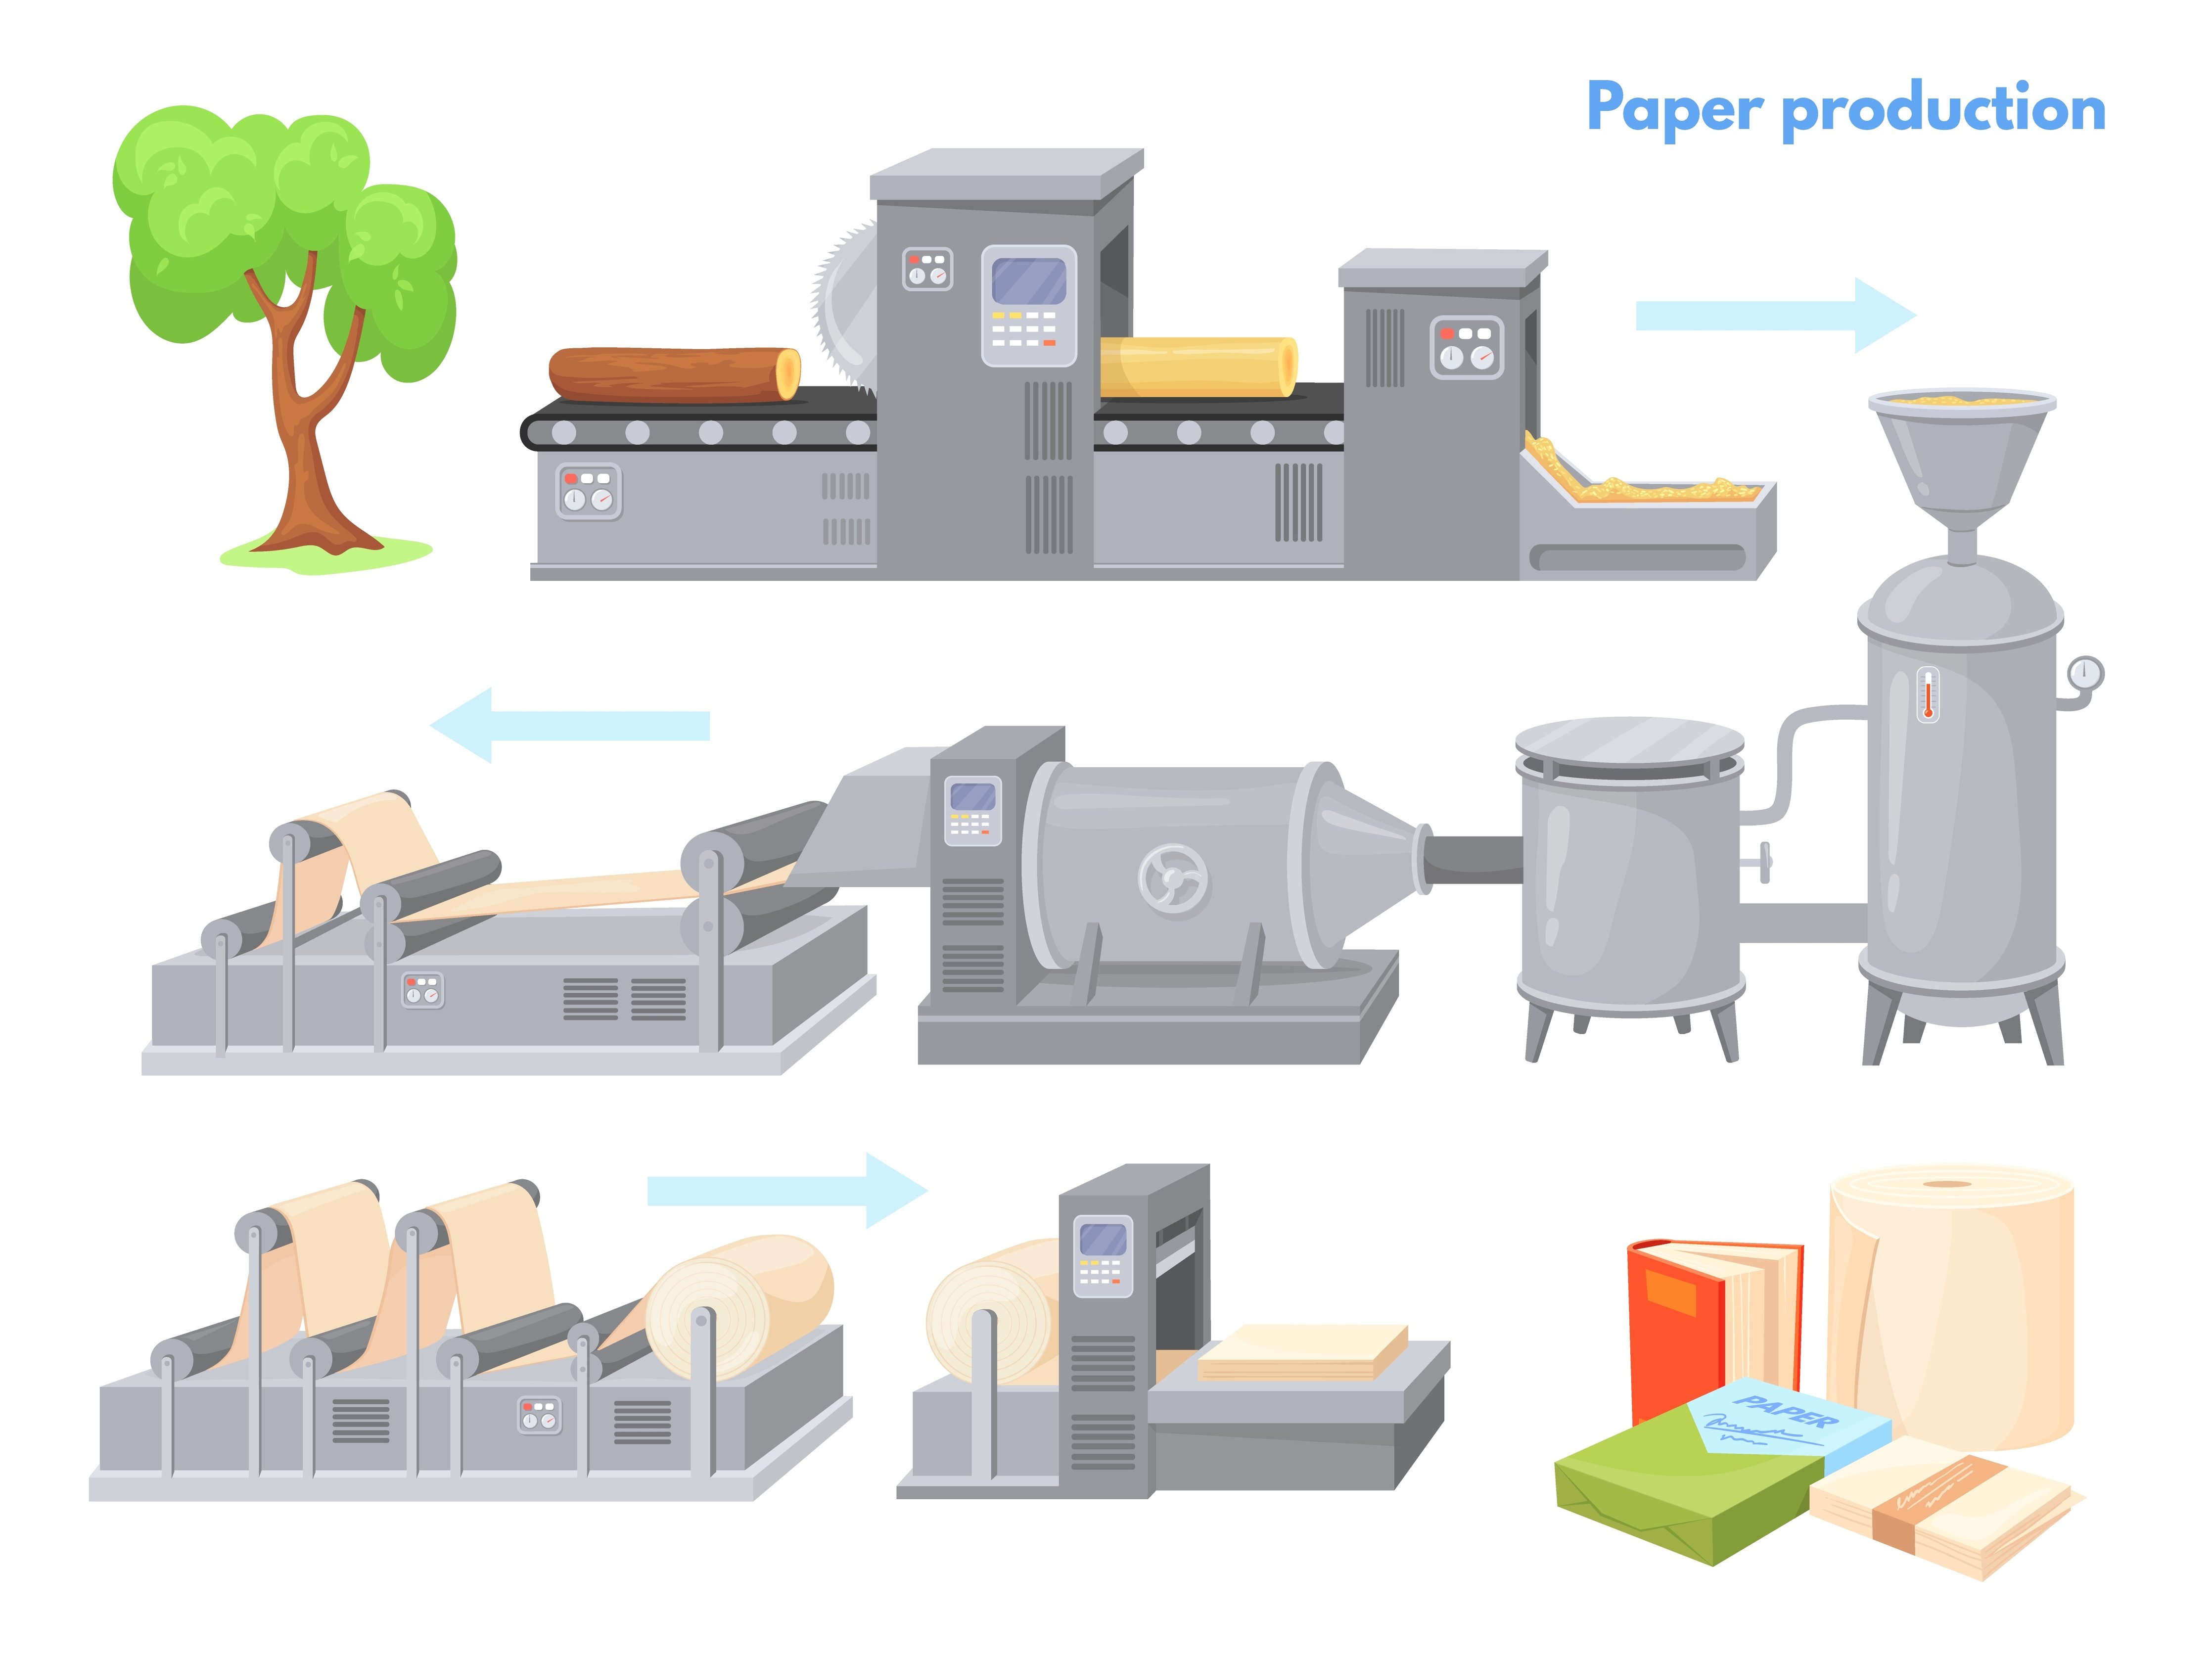 The Pulp & Paper Making Process